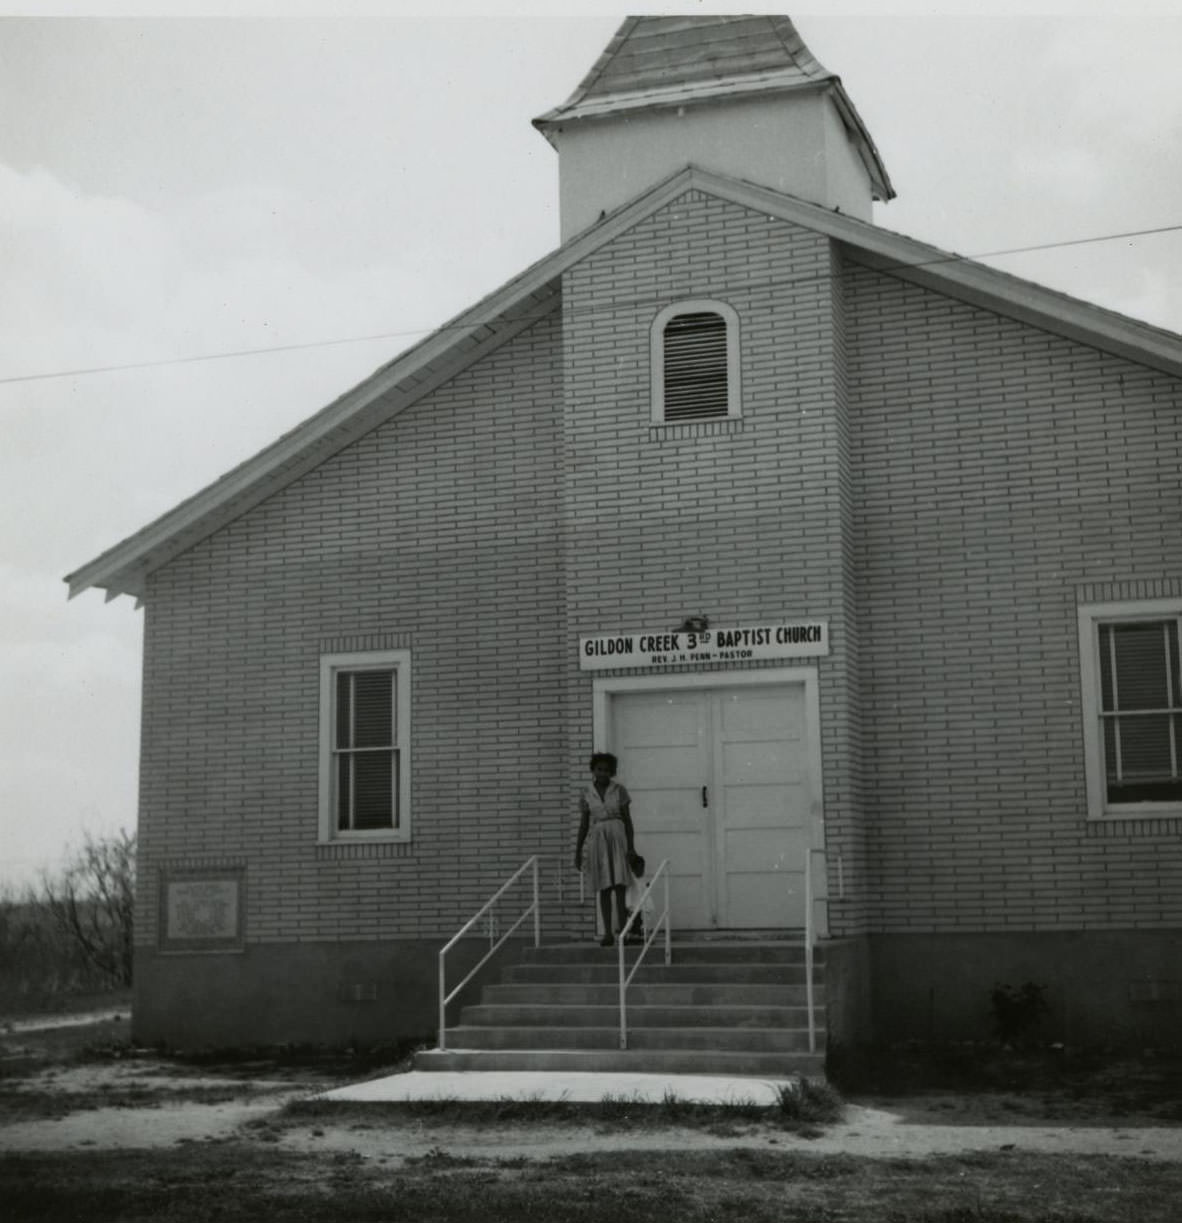 A woman standing on the front steps of the Gildon Creek Third Baptist Church building, 1962